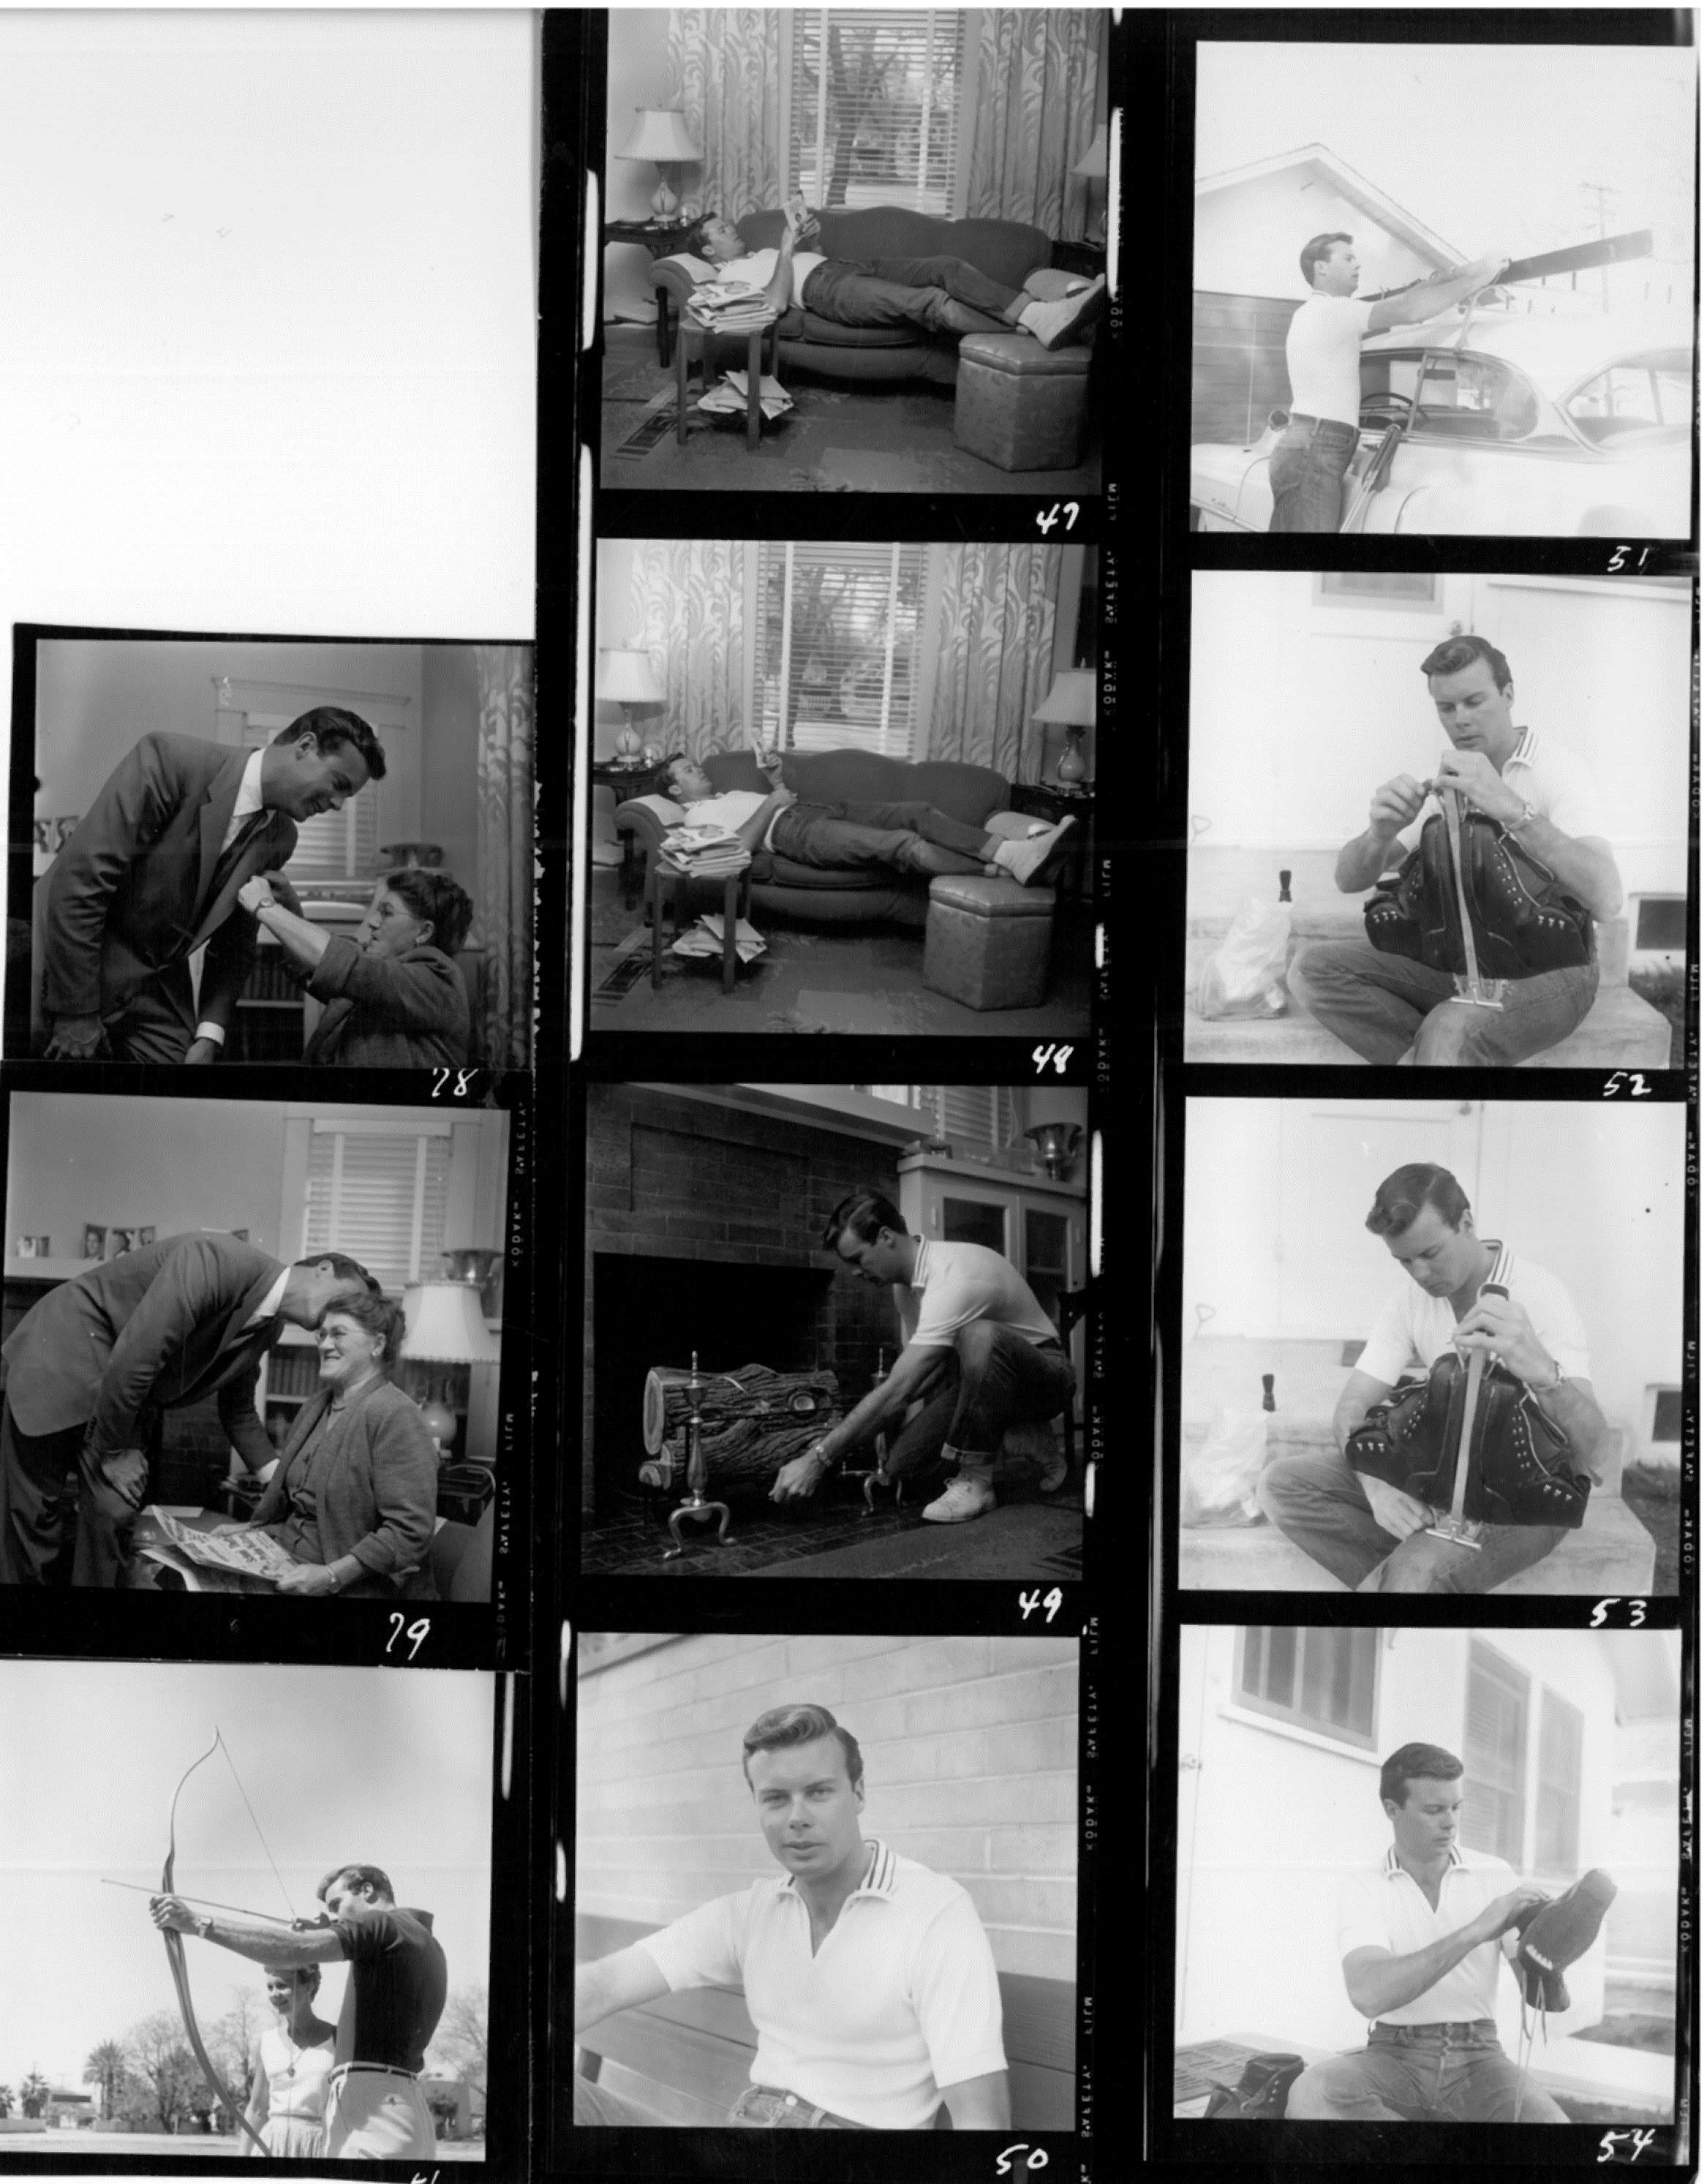  Some or all of the photographs on this contact  sheet were shot on or about Jan. 28, 1955. Photographer: Barberi for Globe Photos, New York City. The name of the photo story was “A Day to Loaf” and was scheduled to appear in the  Screenland , Sept. 